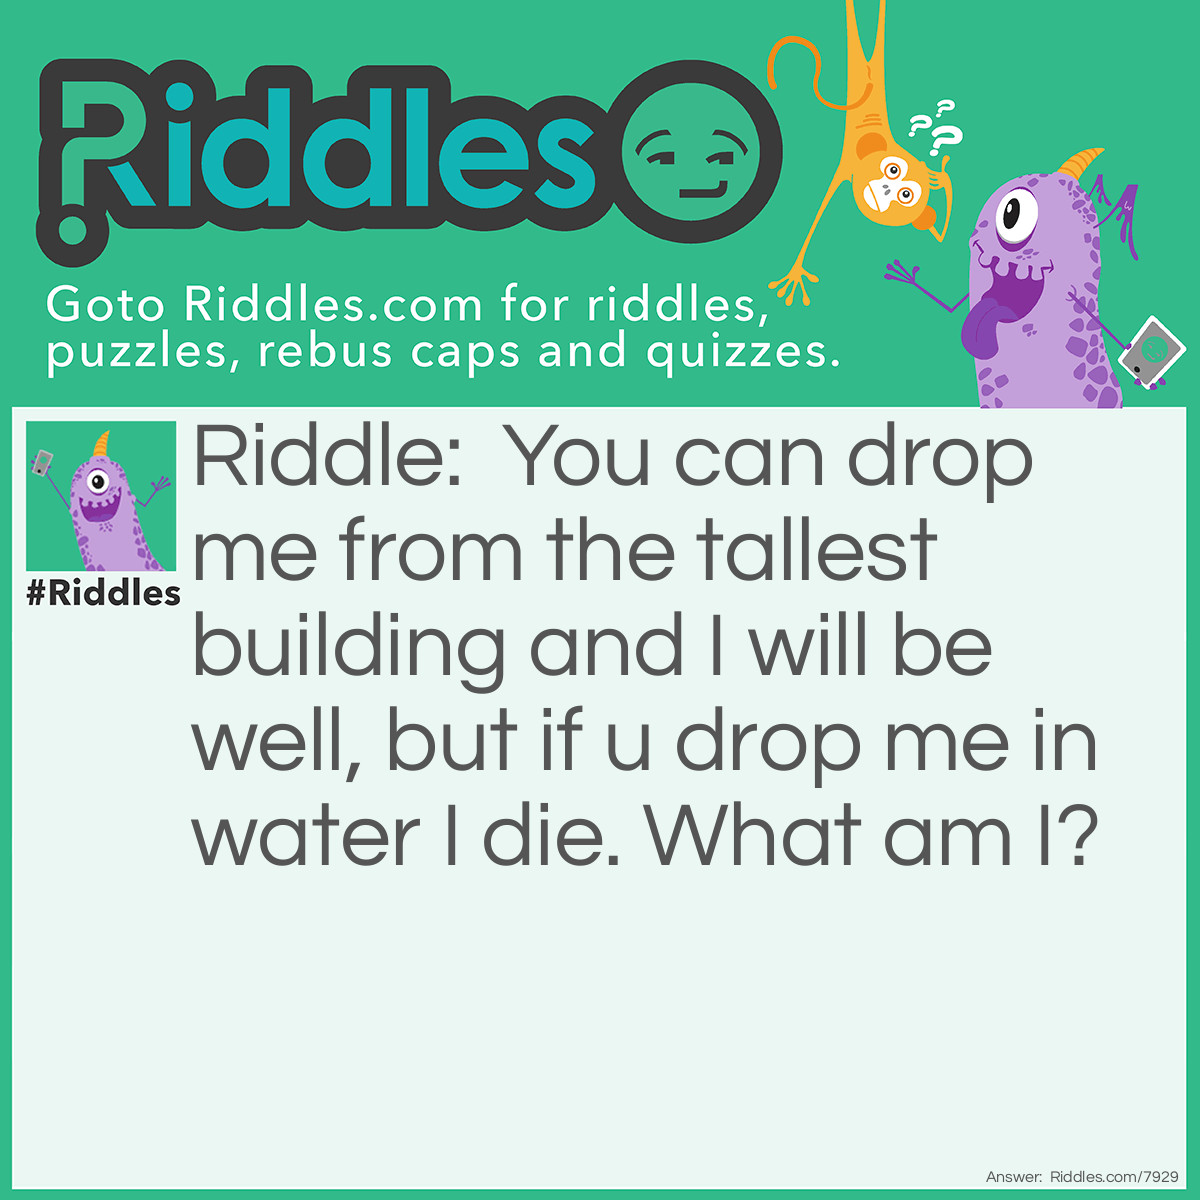 Riddle: You can drop me from the tallest building and I will be well, but if u drop me in water I die. What am I? Answer: Paper.